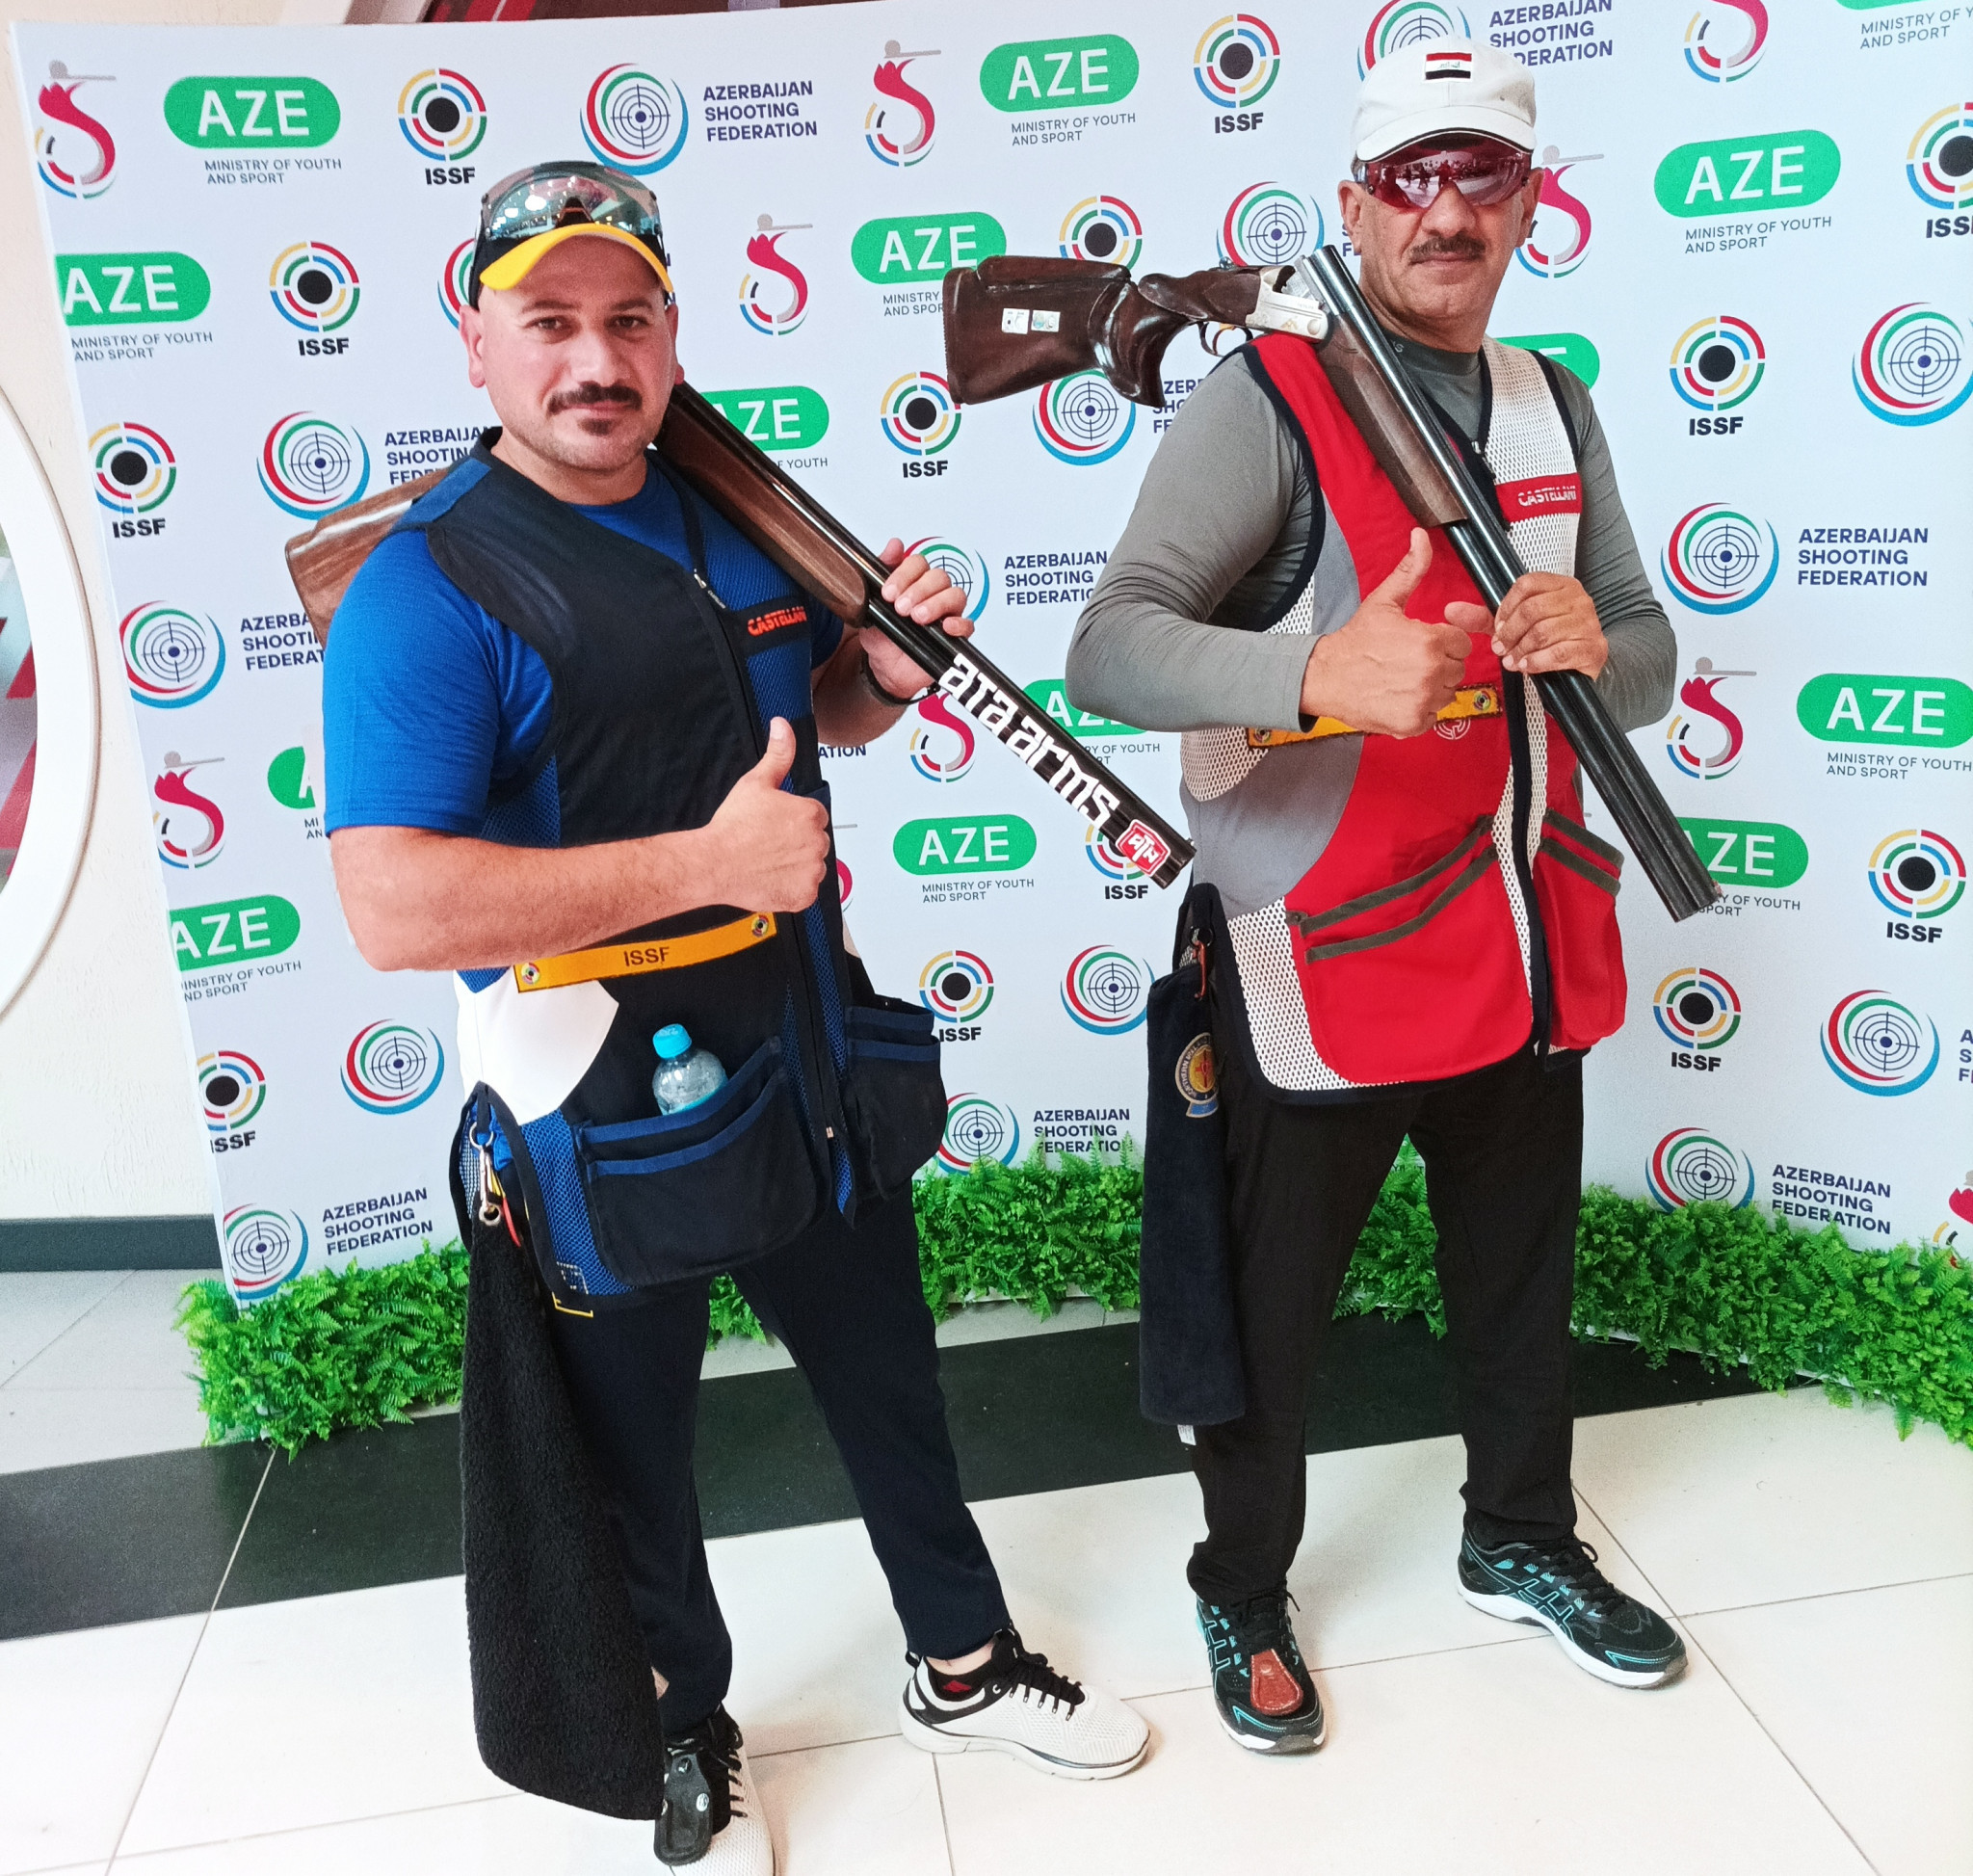 After last year when the World Championships for shotgun events were held separately, all shooters are together in Baku ©ITG